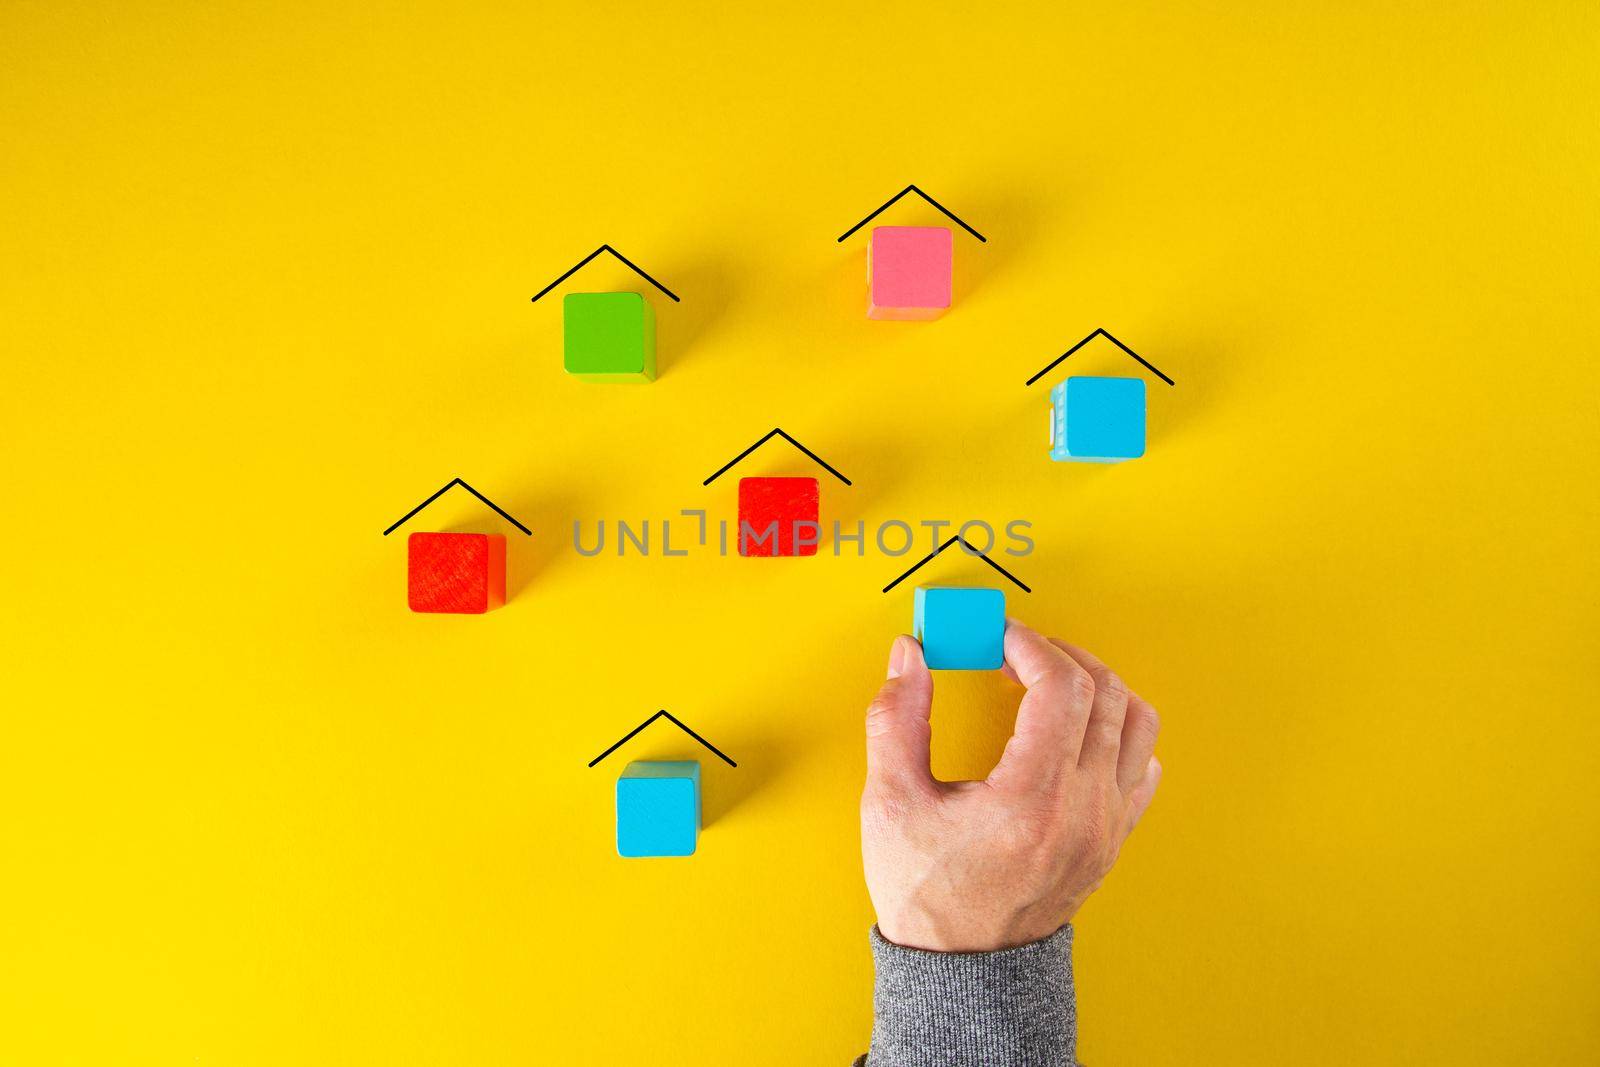 Male hand making many houses of wooden blocks in a conceptual image of real estate and urban planning. by tehcheesiong